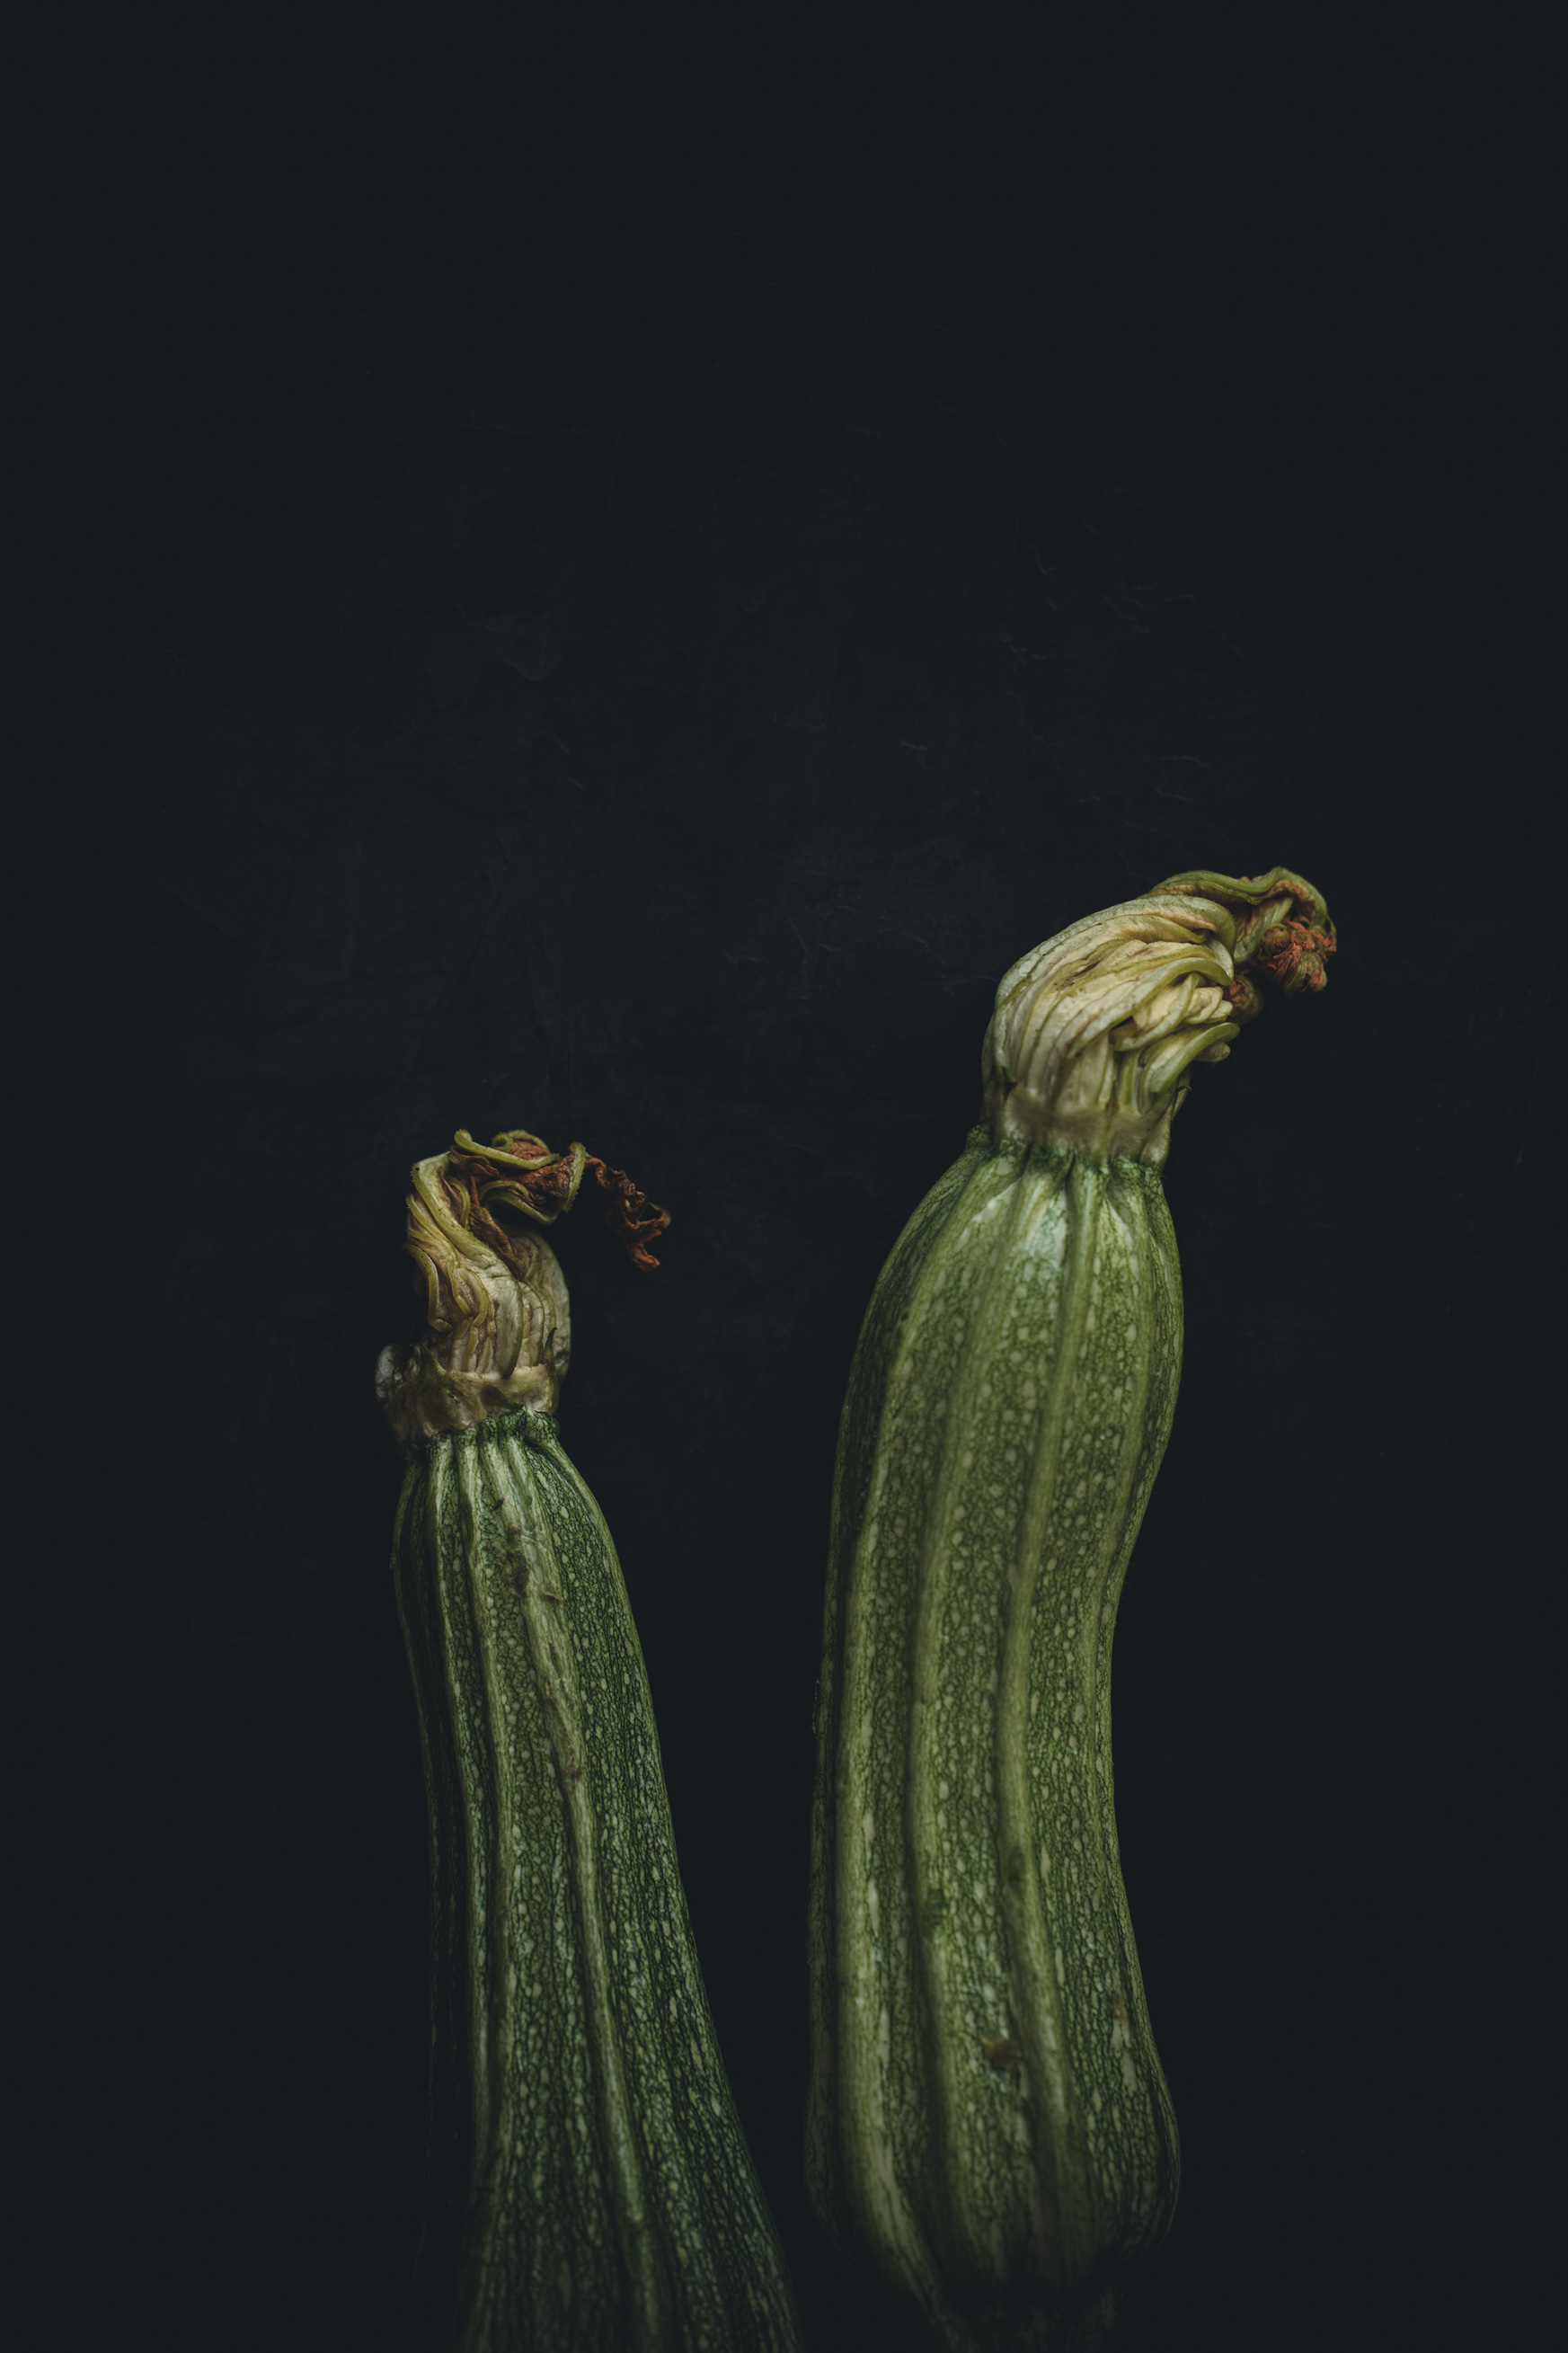 Summer Squash on a black background from the Moody Food series by John Robson Photography